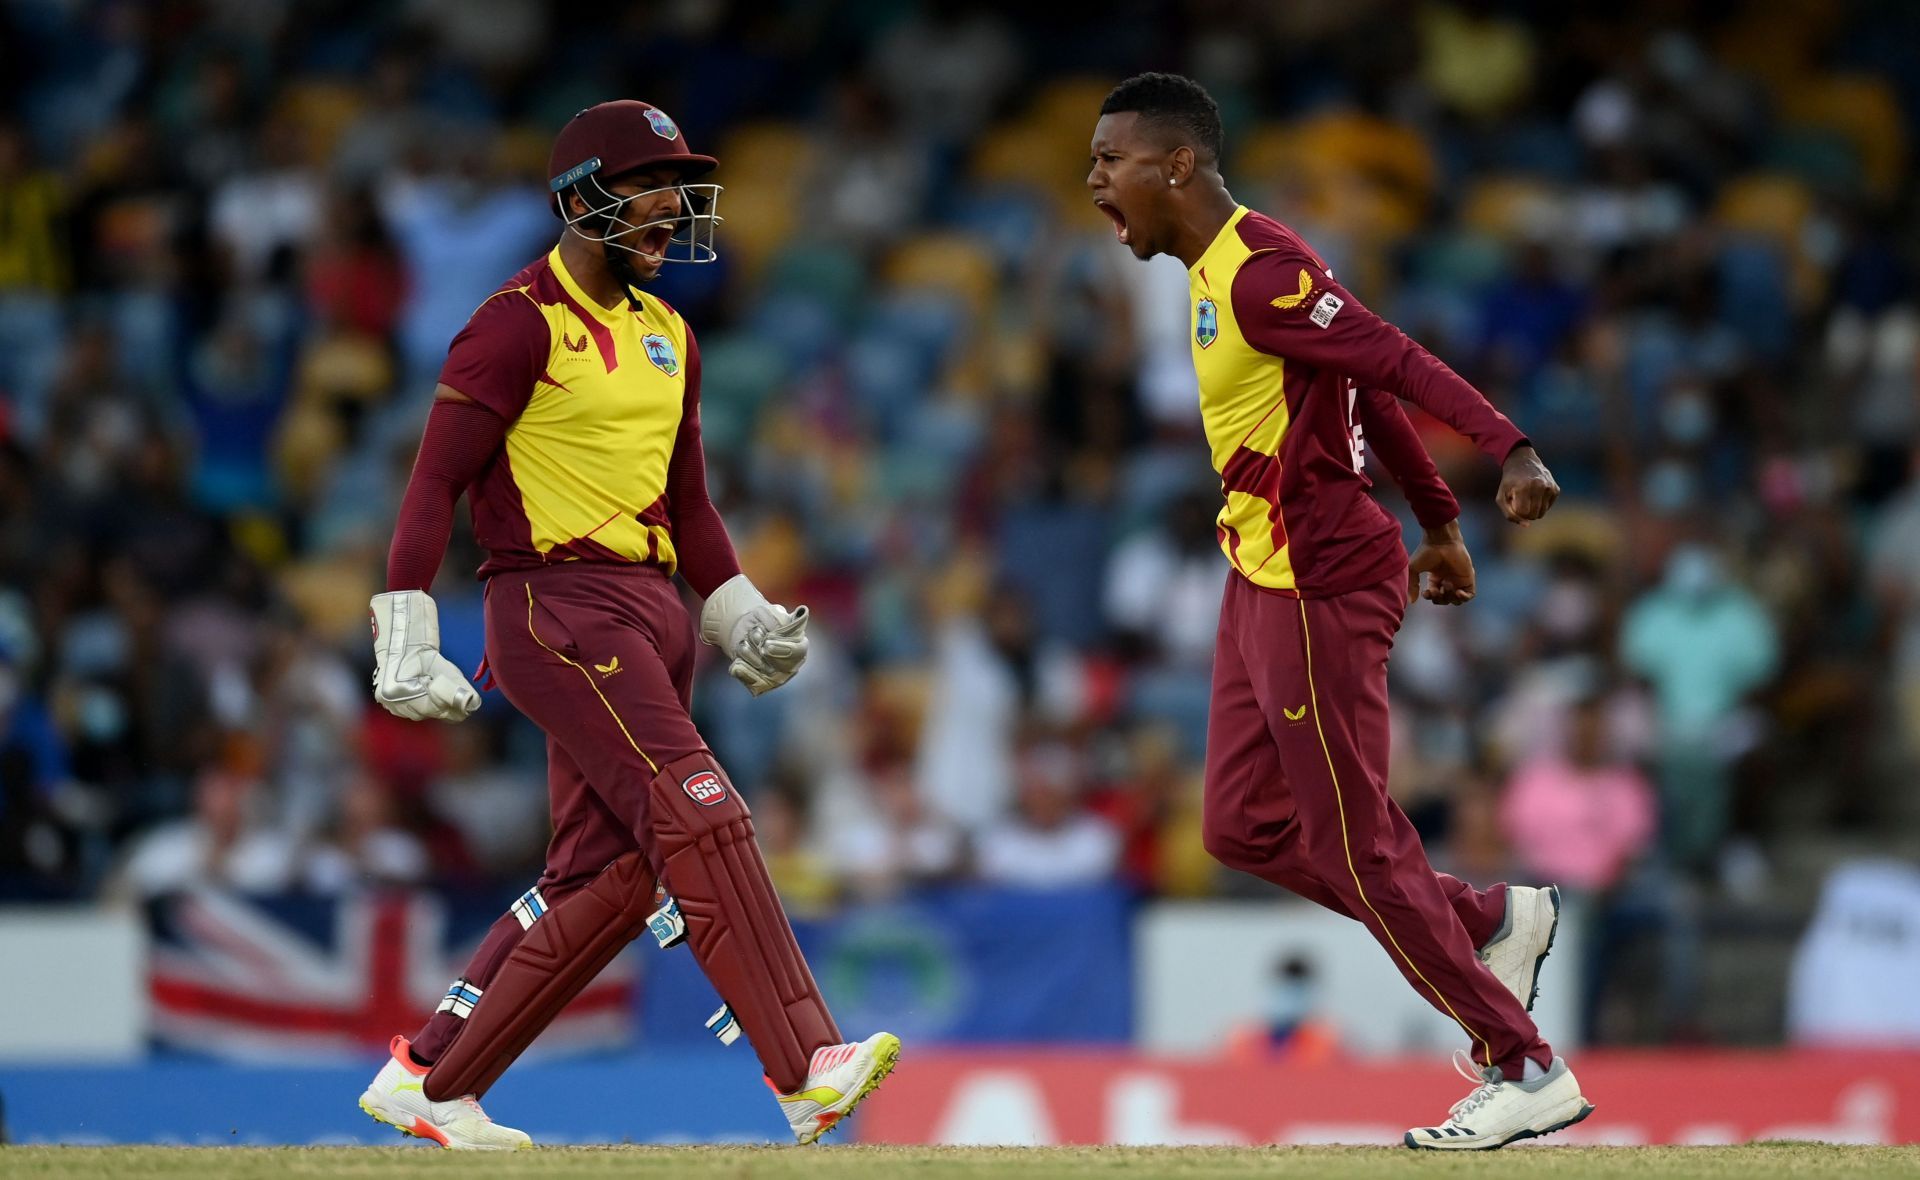 West Indies have the players to trouble India